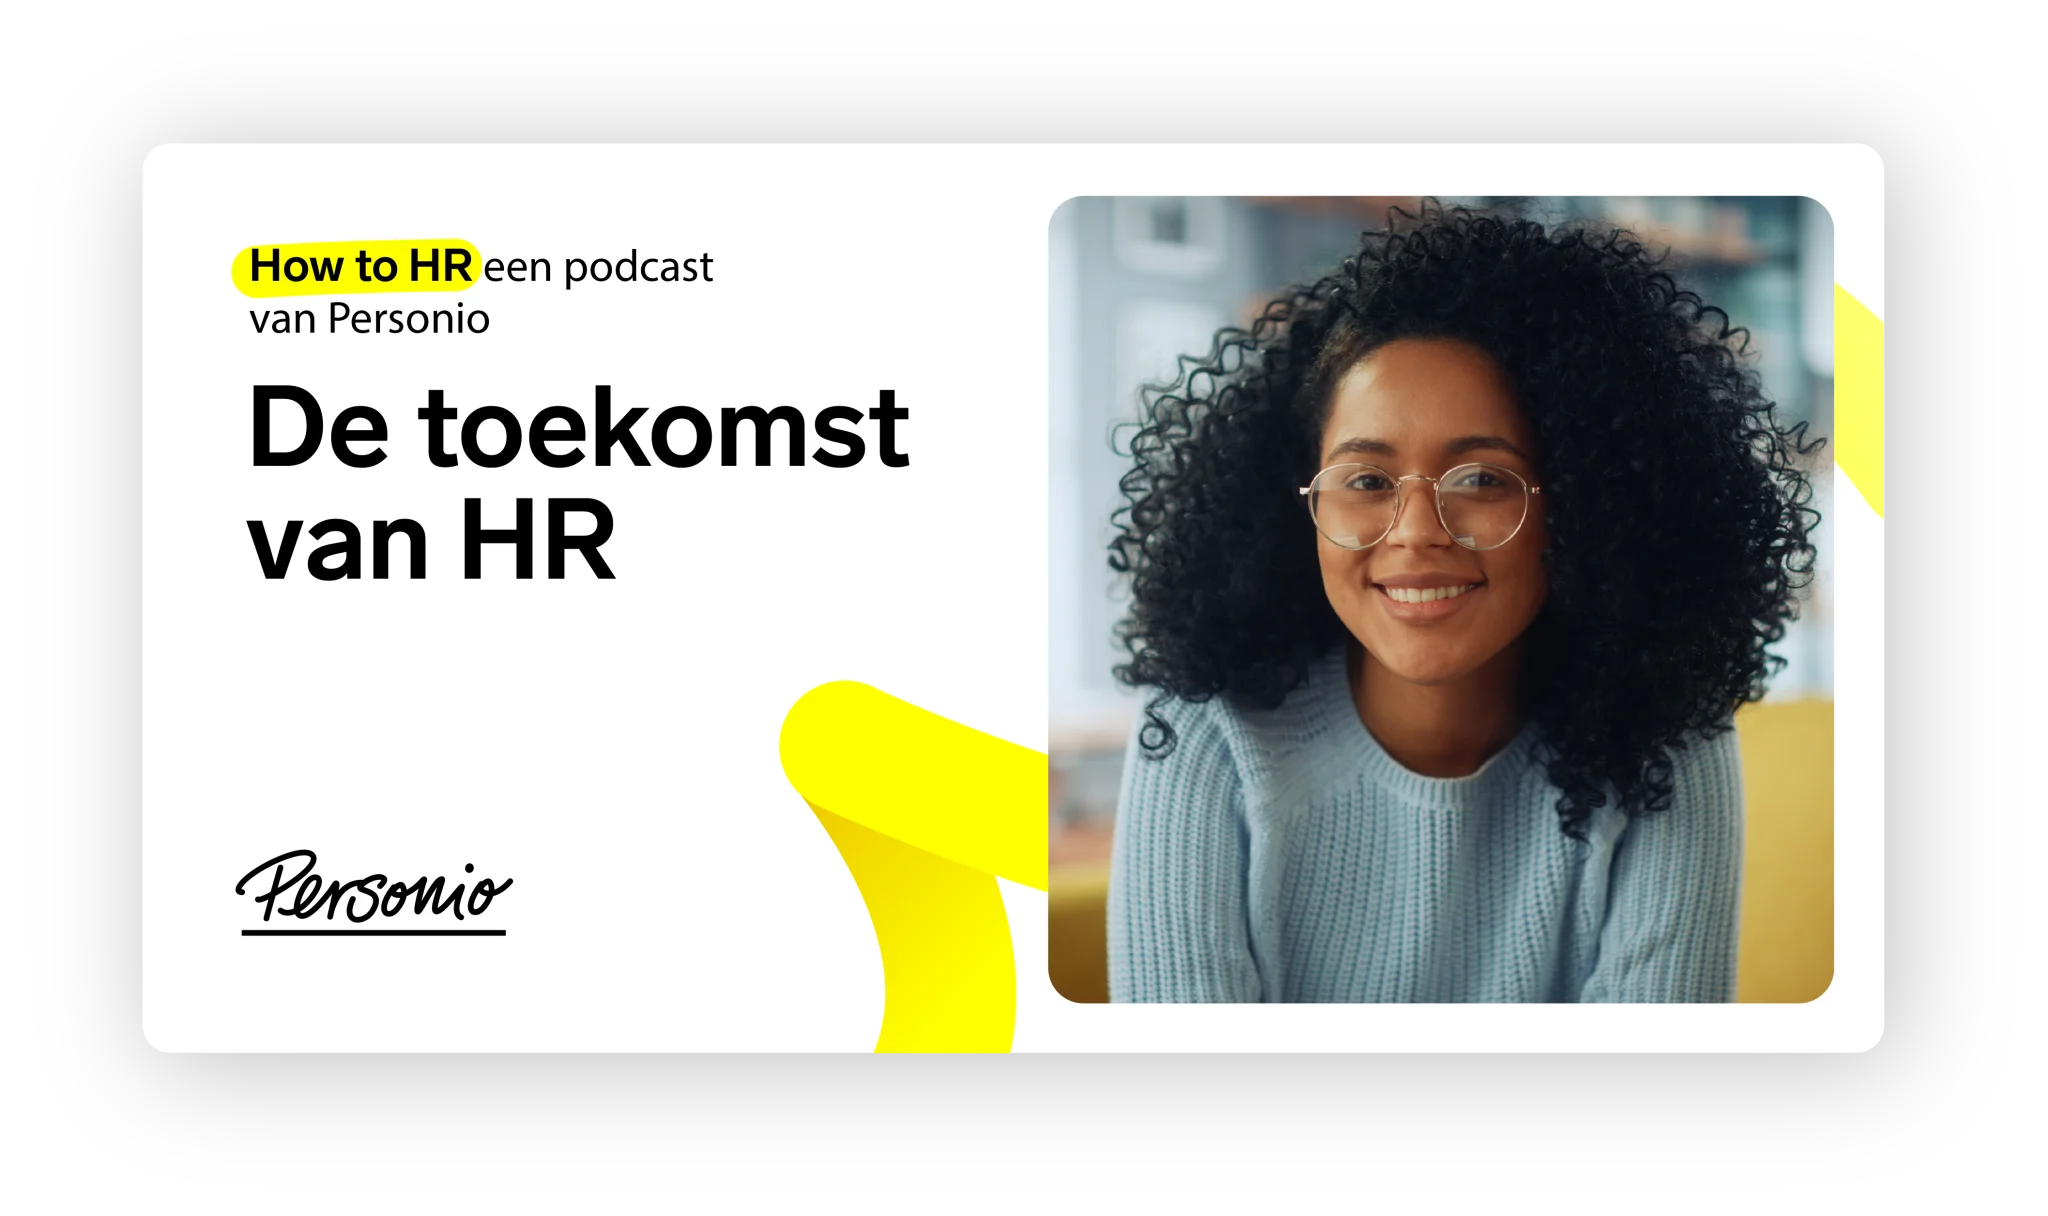 The HR podcast by Personio